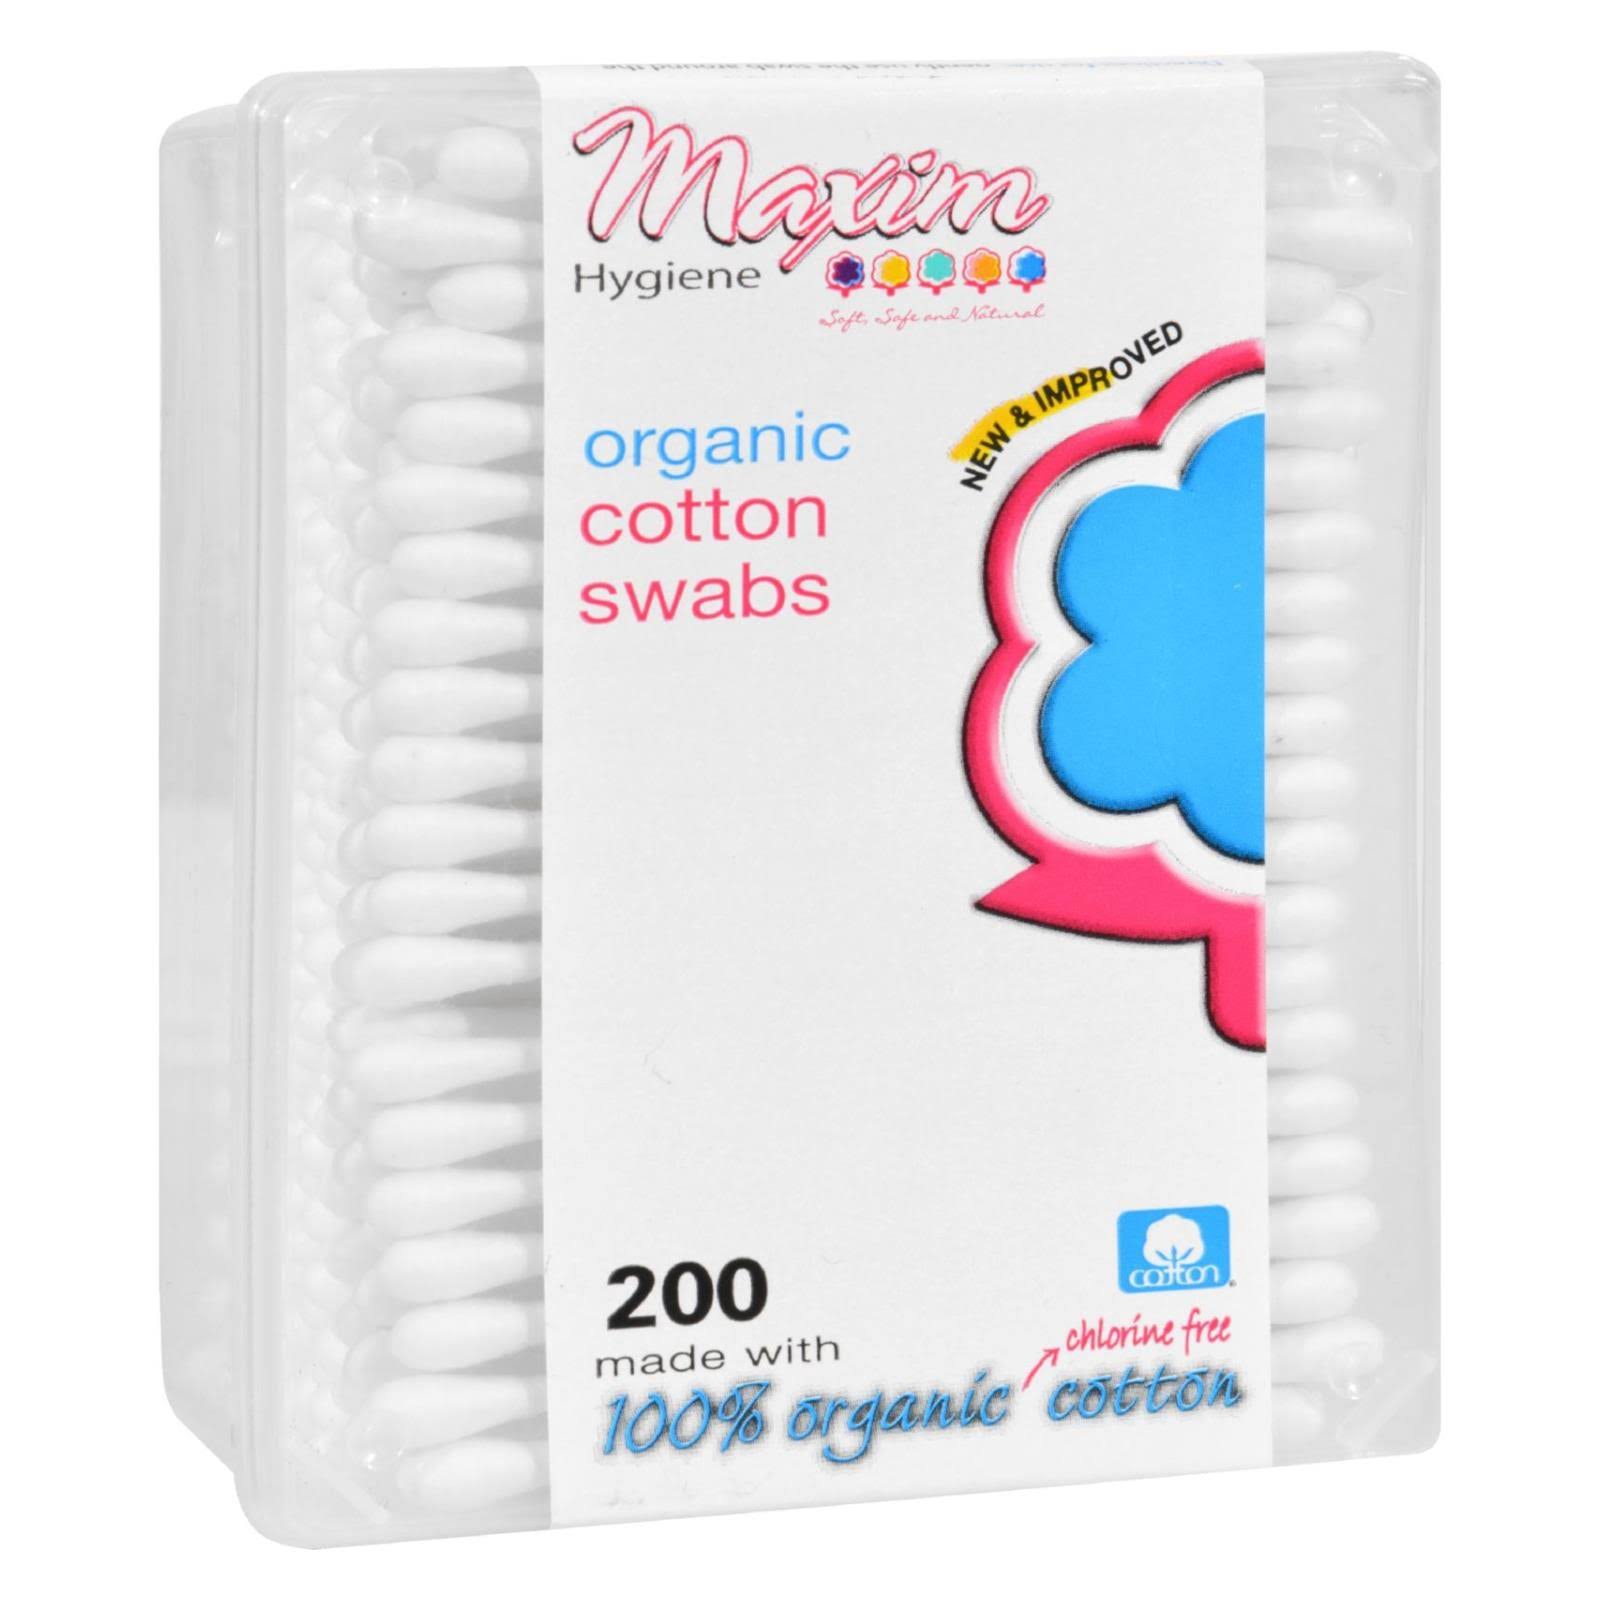 Maxim Hygiene Products - Organic Cotton Swabs - 200 Count